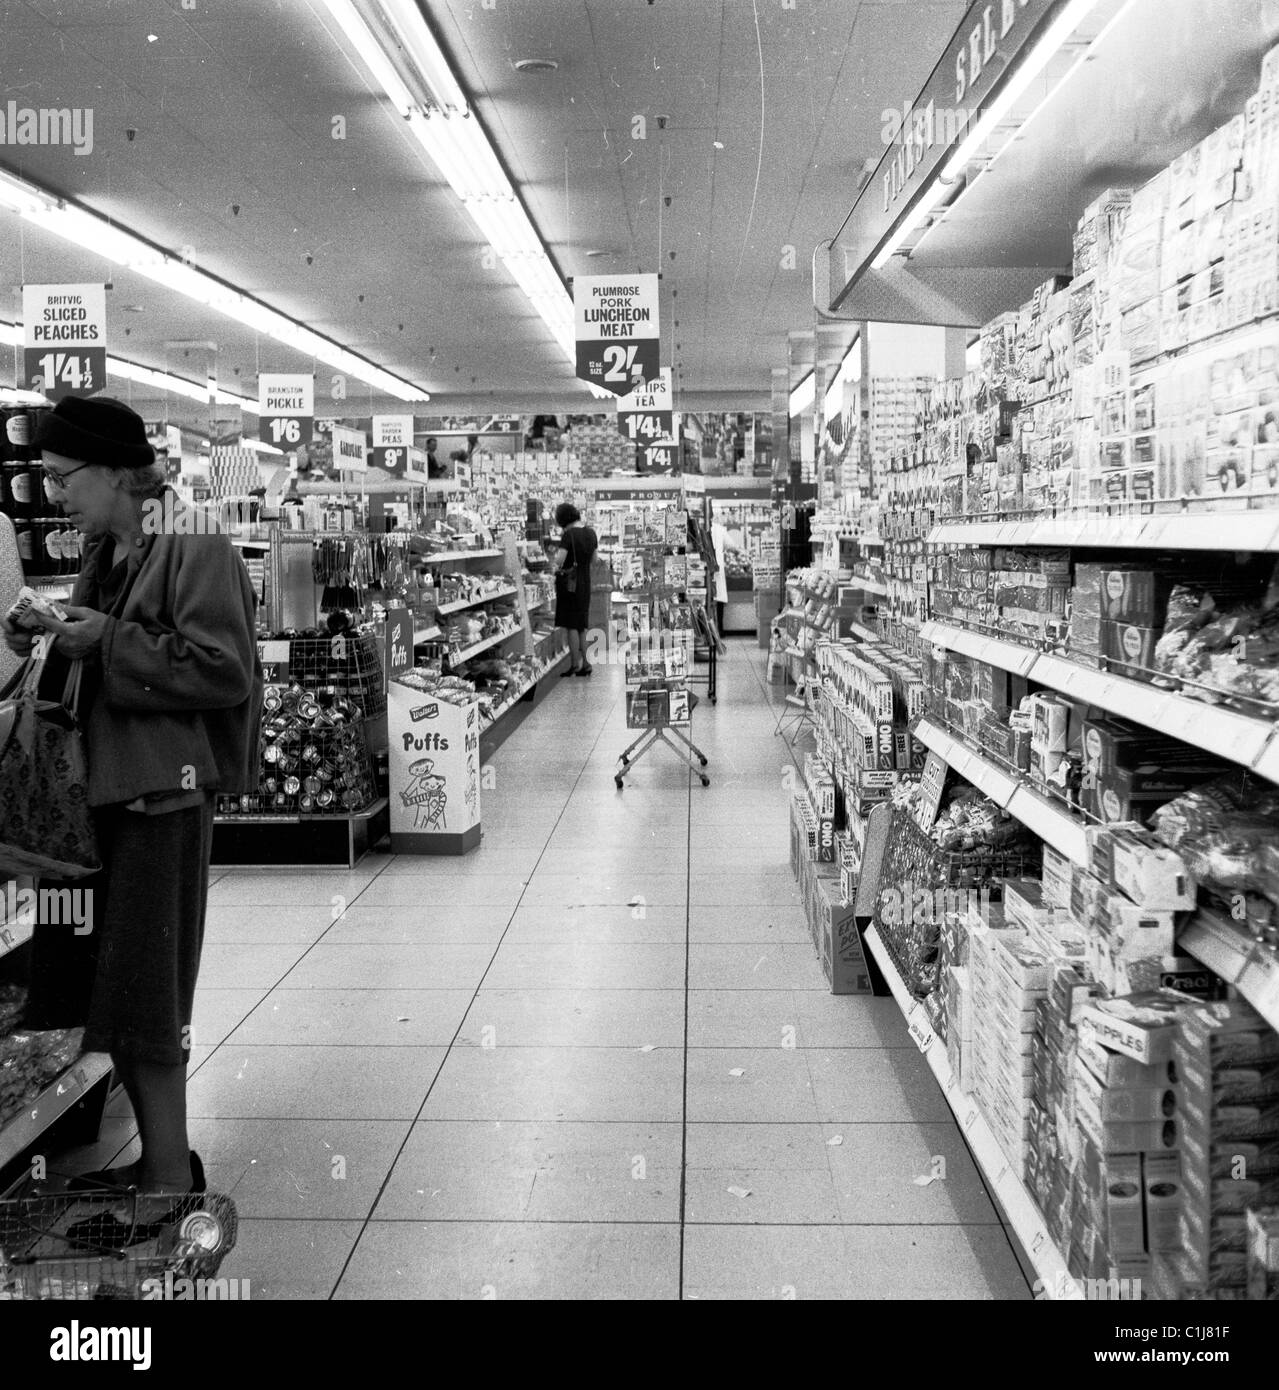 1960s, inside a new kind of grocery store, a large Fine Fare self-service retail convenience shop, one of the first 'supermarkets' in England, UK. Stock Photo